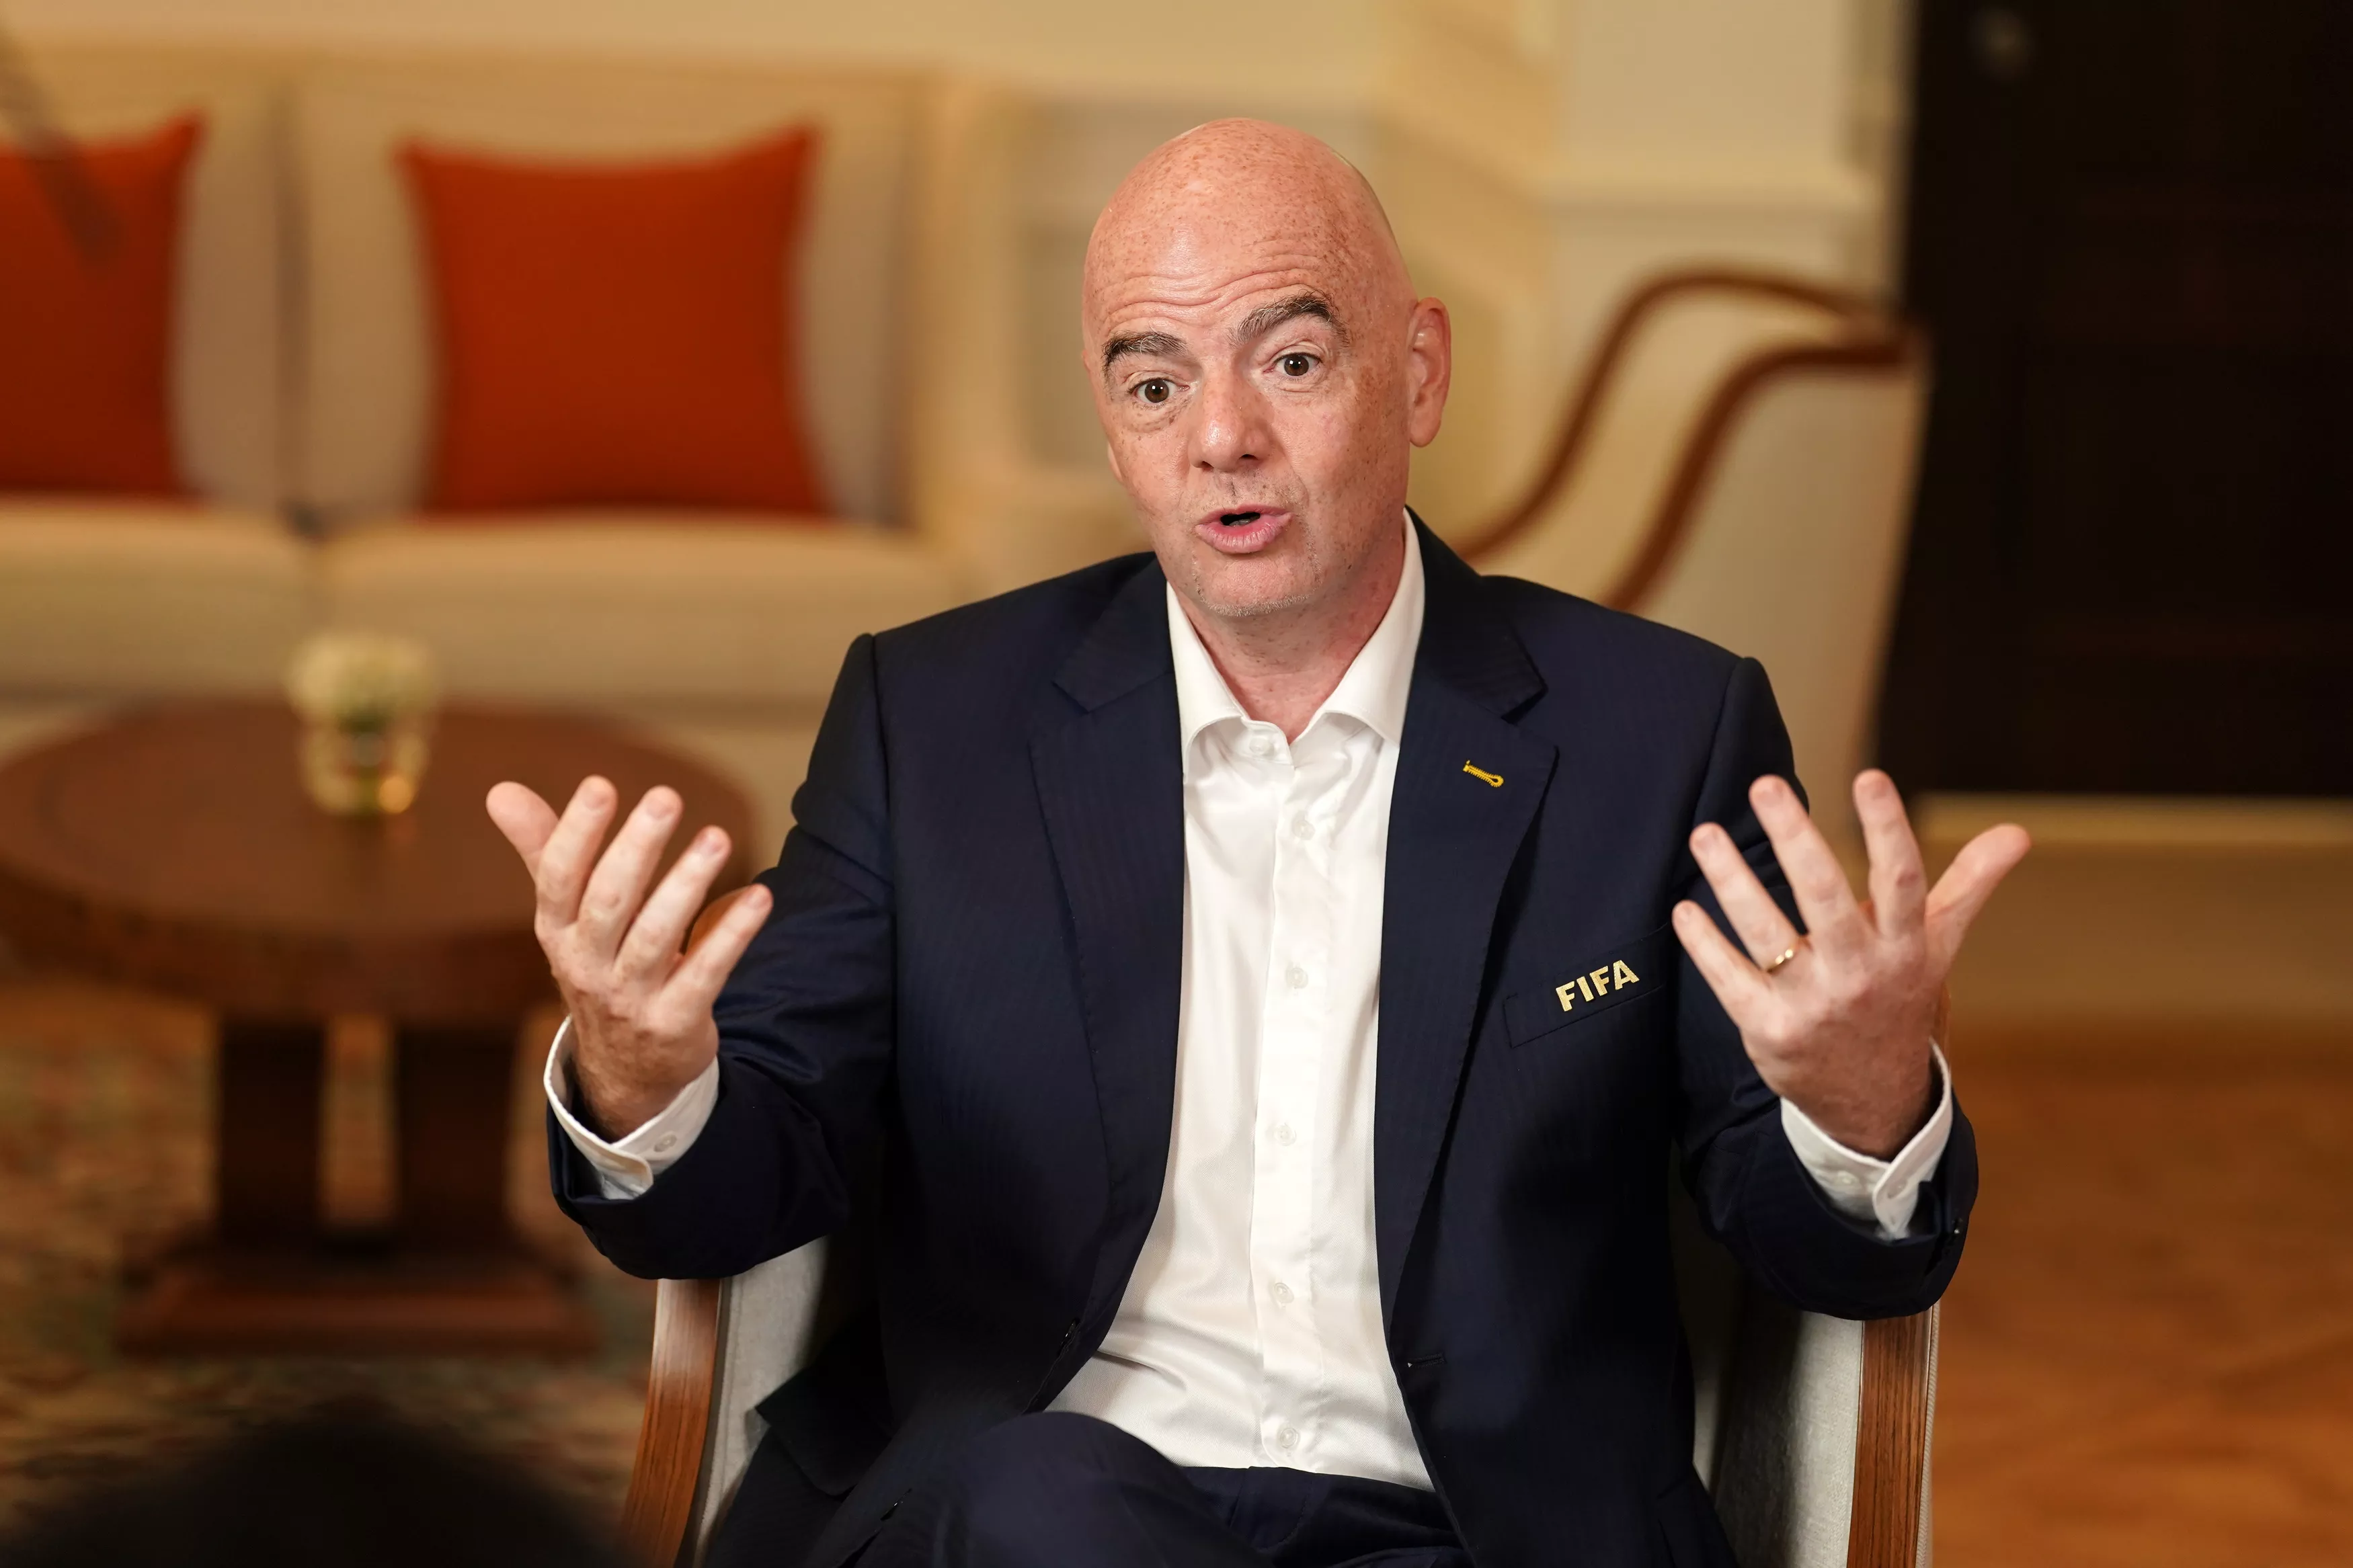 Gianni Infantino acknowledges the FIFA World Cup's "greatest group stage ever"